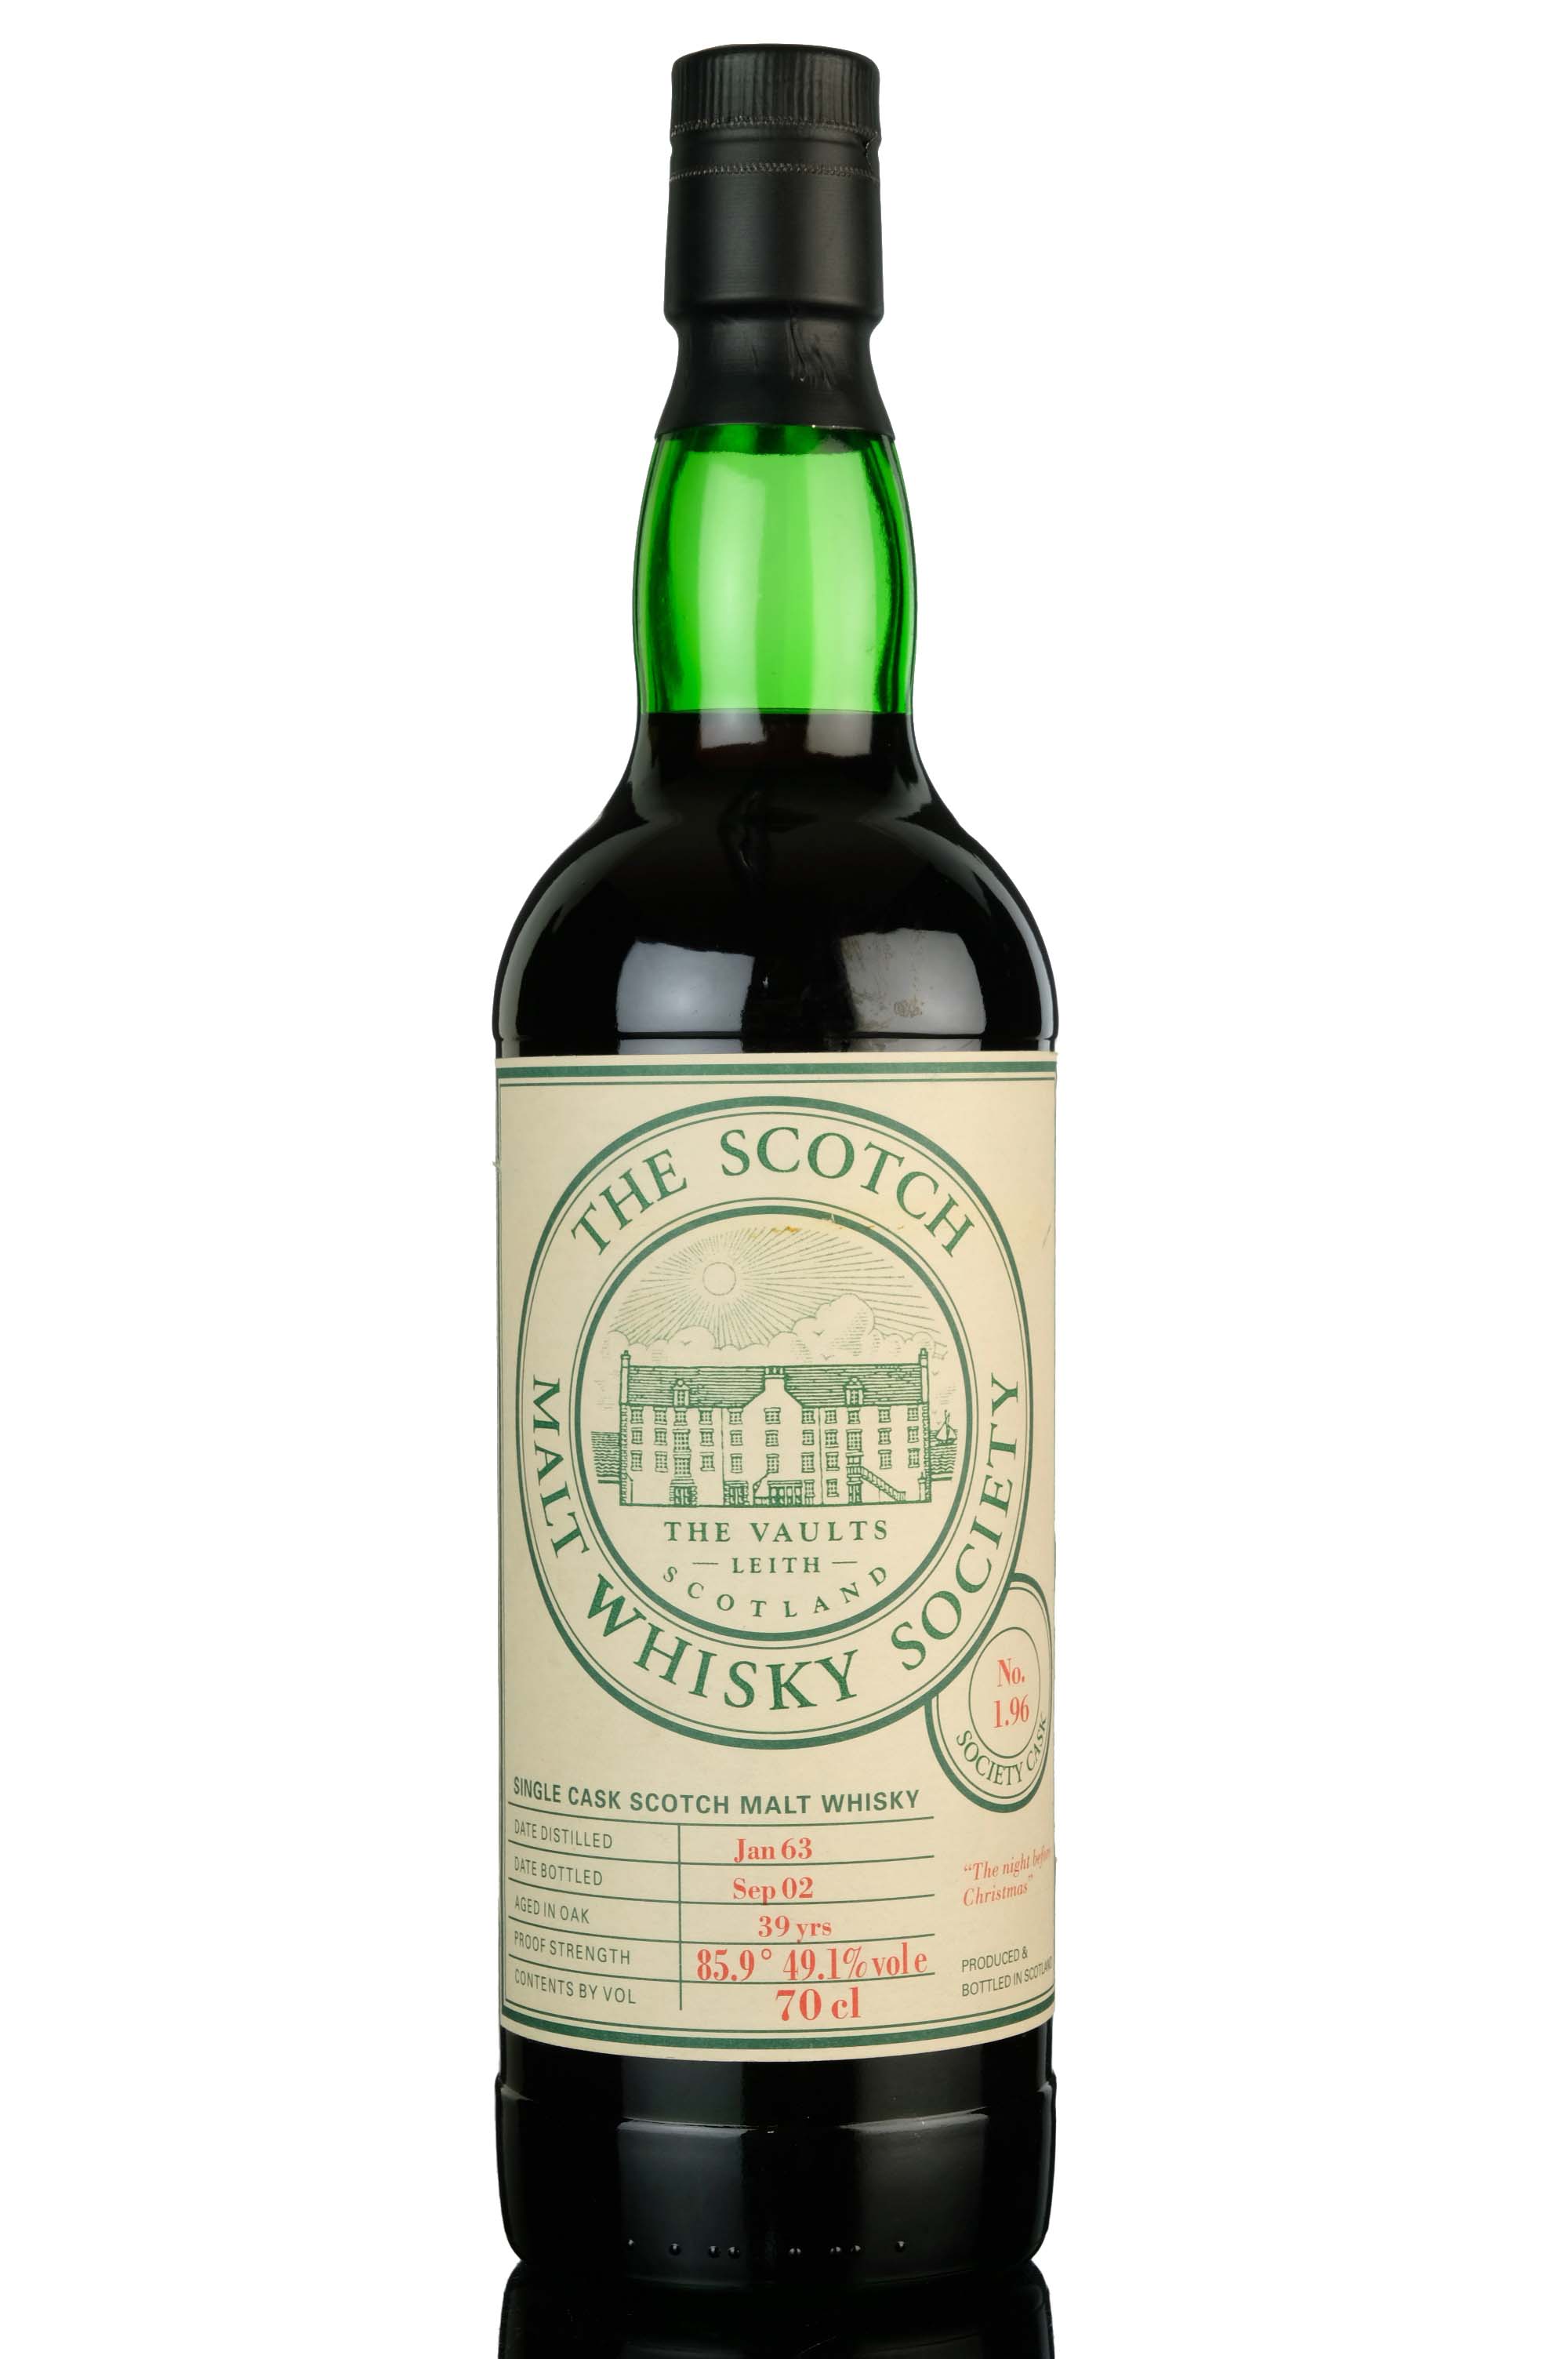 Glenfarclas 1963-2002 - 39 Year Old - SMWS 1.96 - The Night Before Christmas